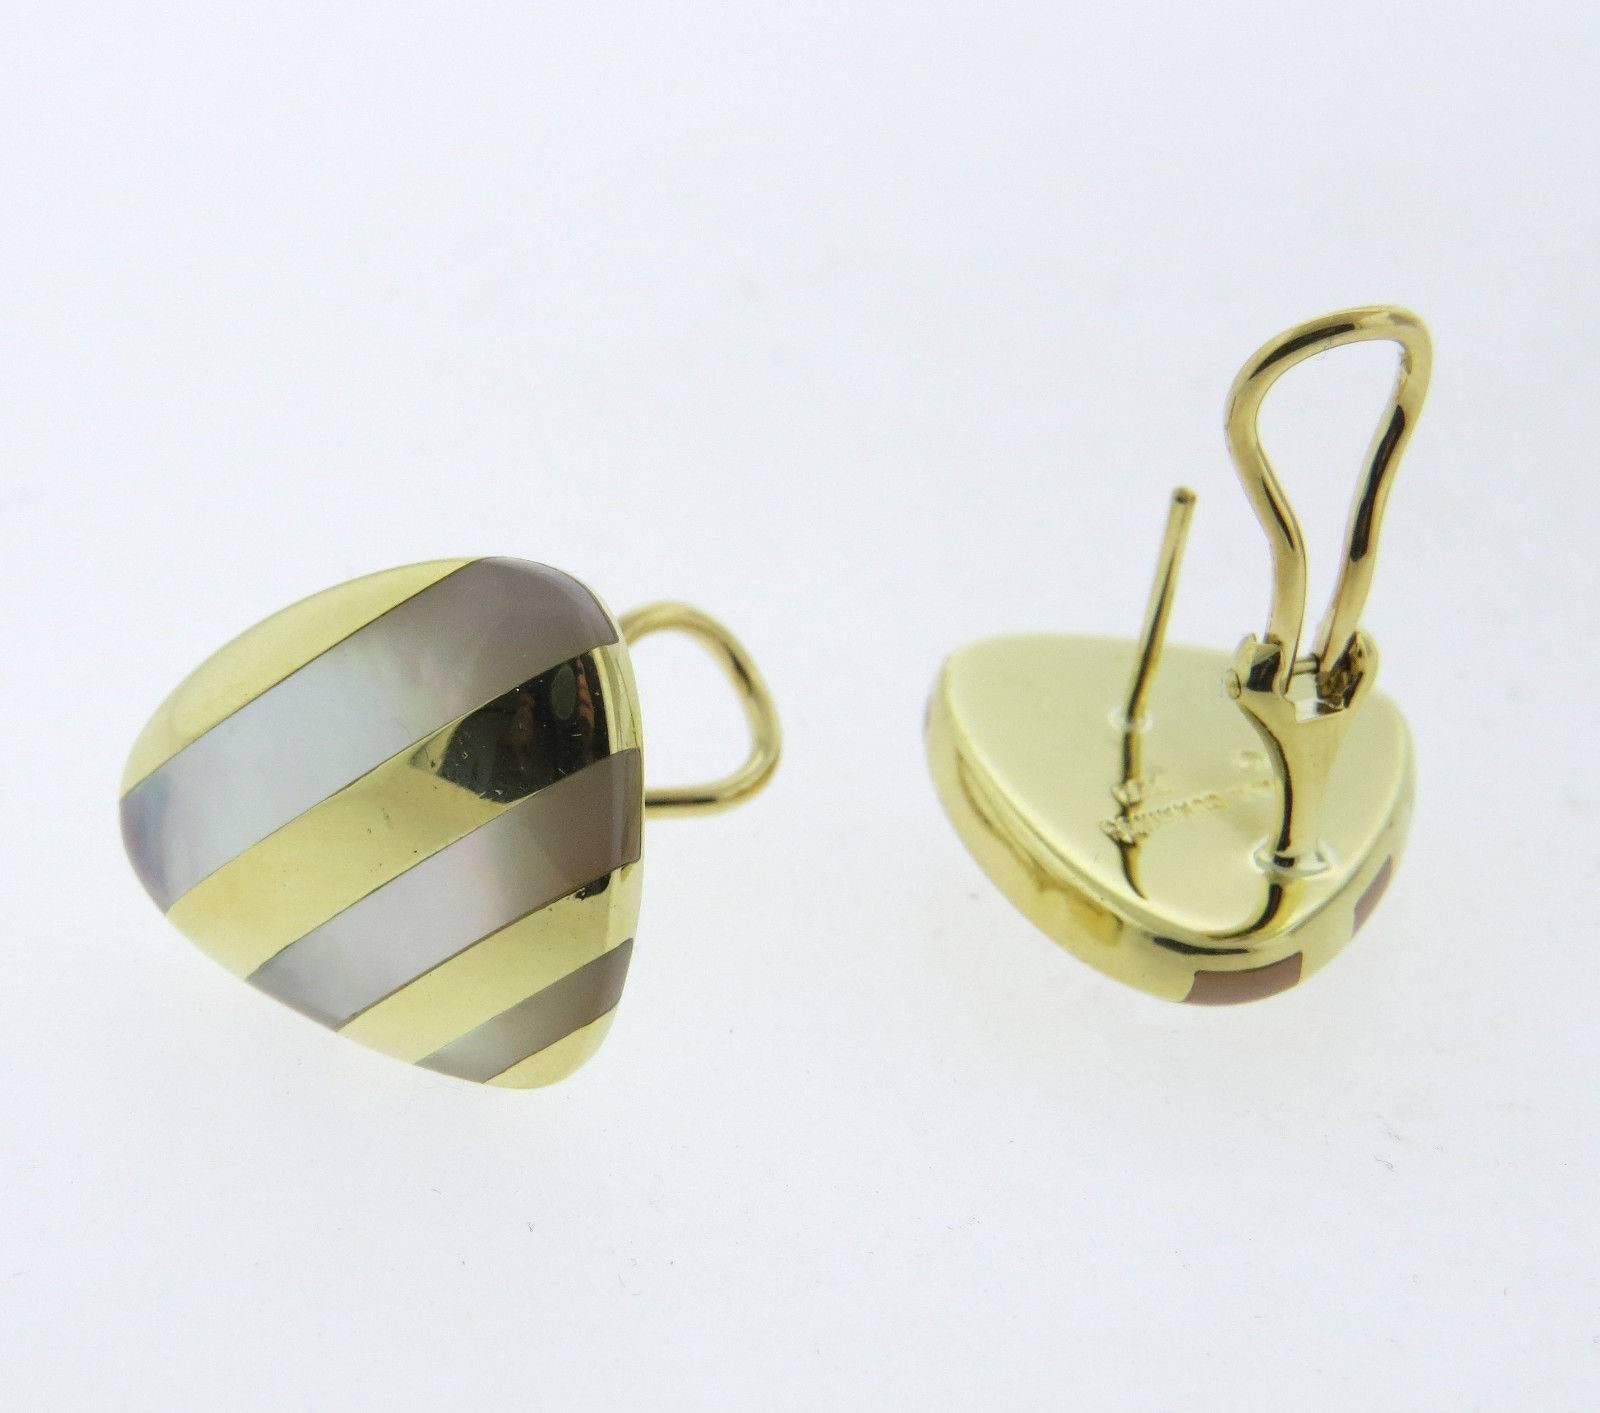 A pair of 18k gold mother of pearl inlay earrings by Angela Cummings.  The earrings measure 22mm x 18mm and weigh	12.8 grams.  Marked: Angela Cummings, 750